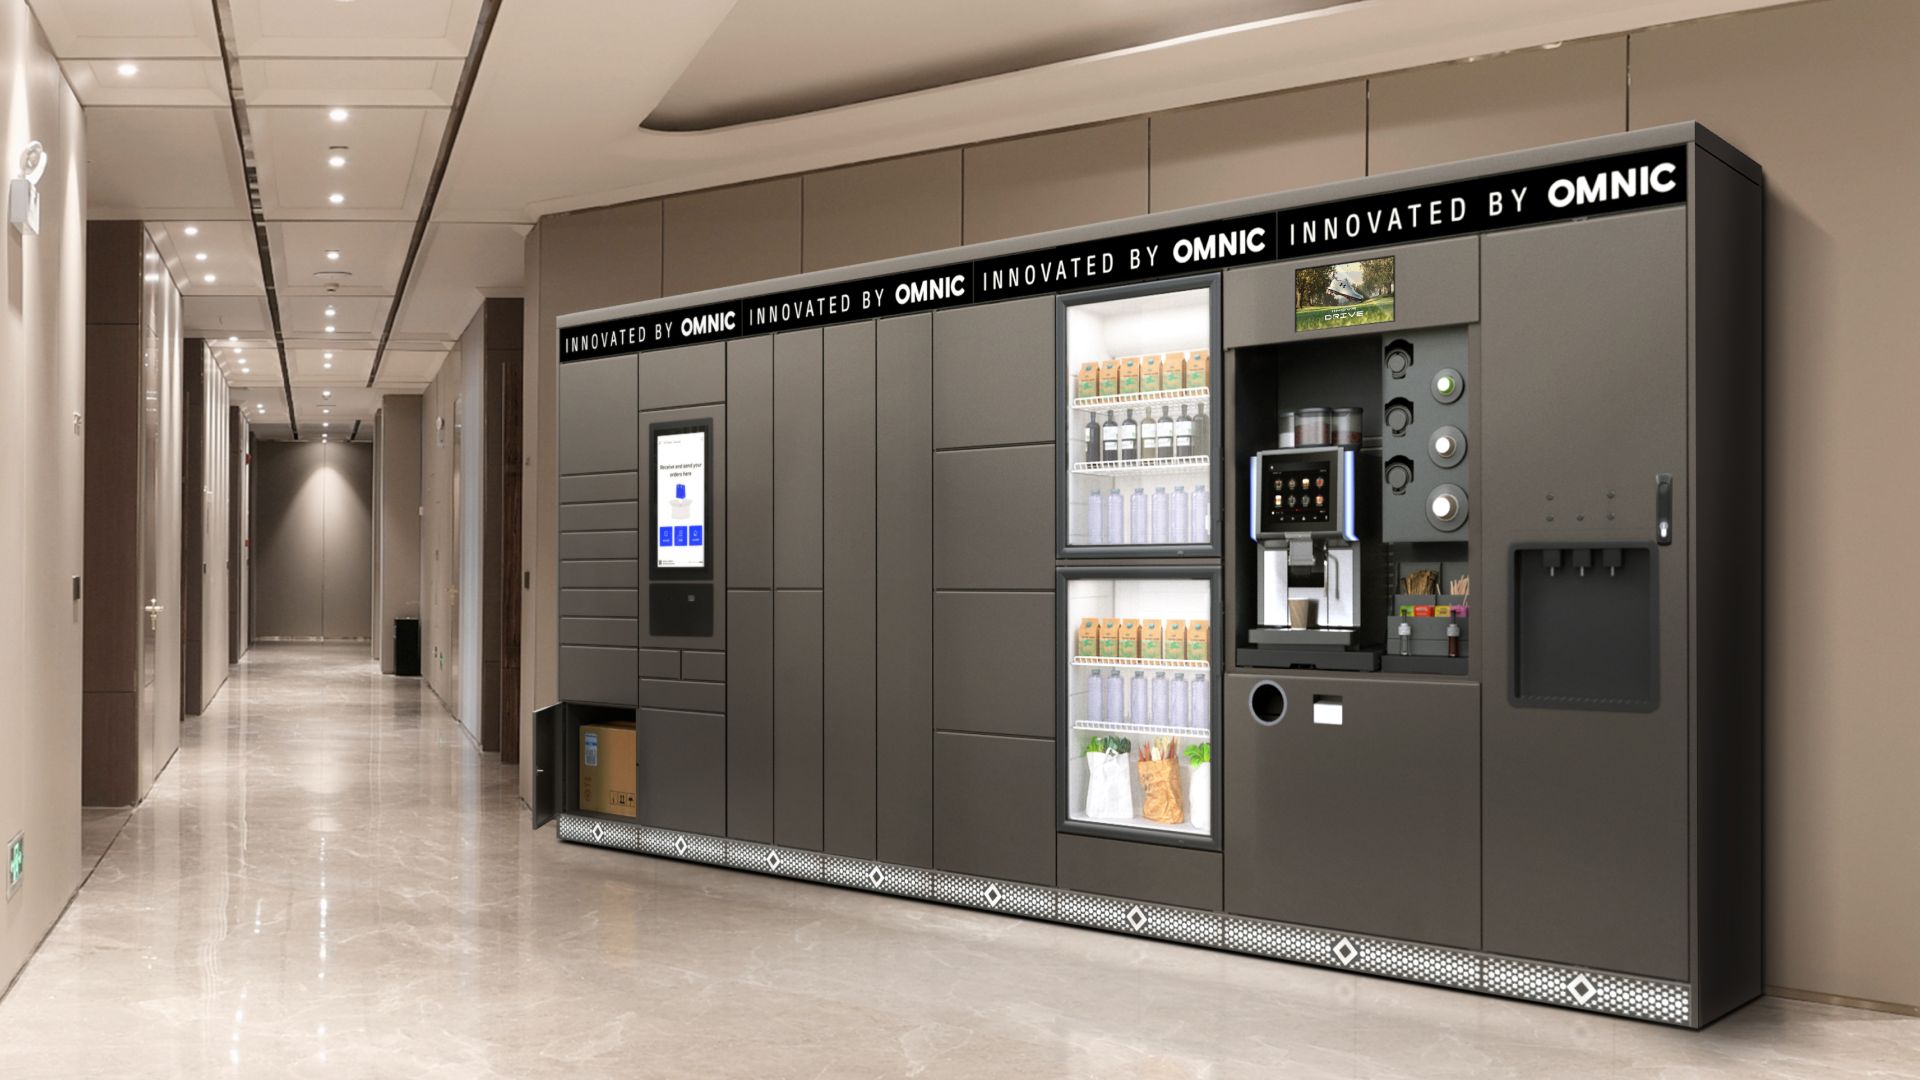 How to reduce queues: Smart Parcel Lockers for restaurants, pizzerias and cafes